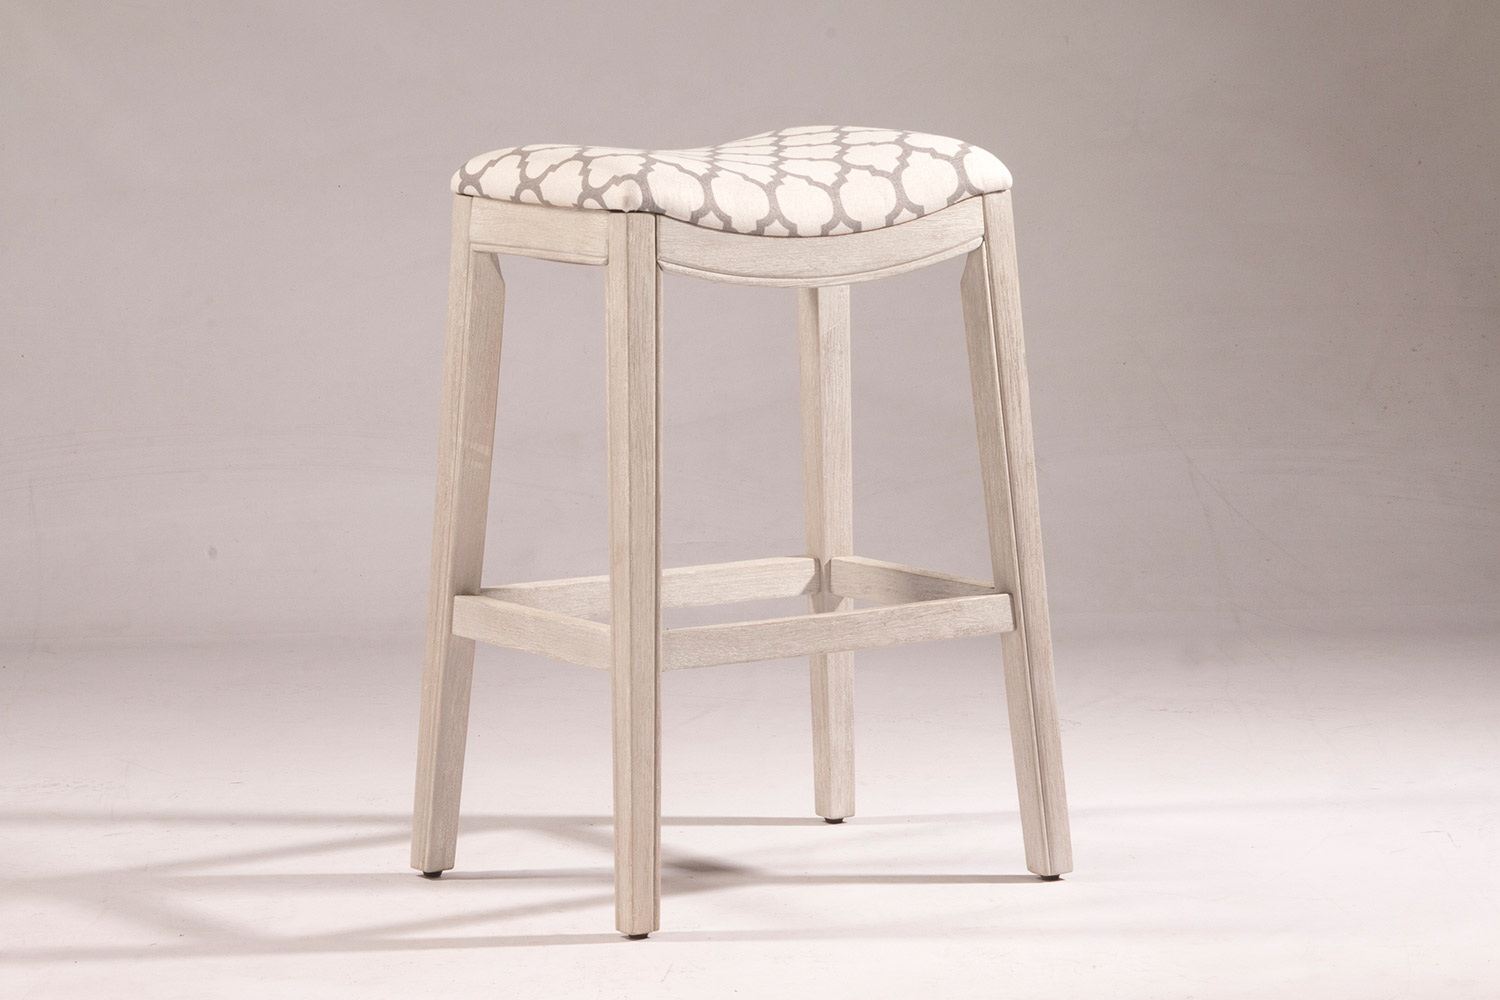 Hillsdale Sorella Wood Backless Counter Height Stool - White Wire Brush